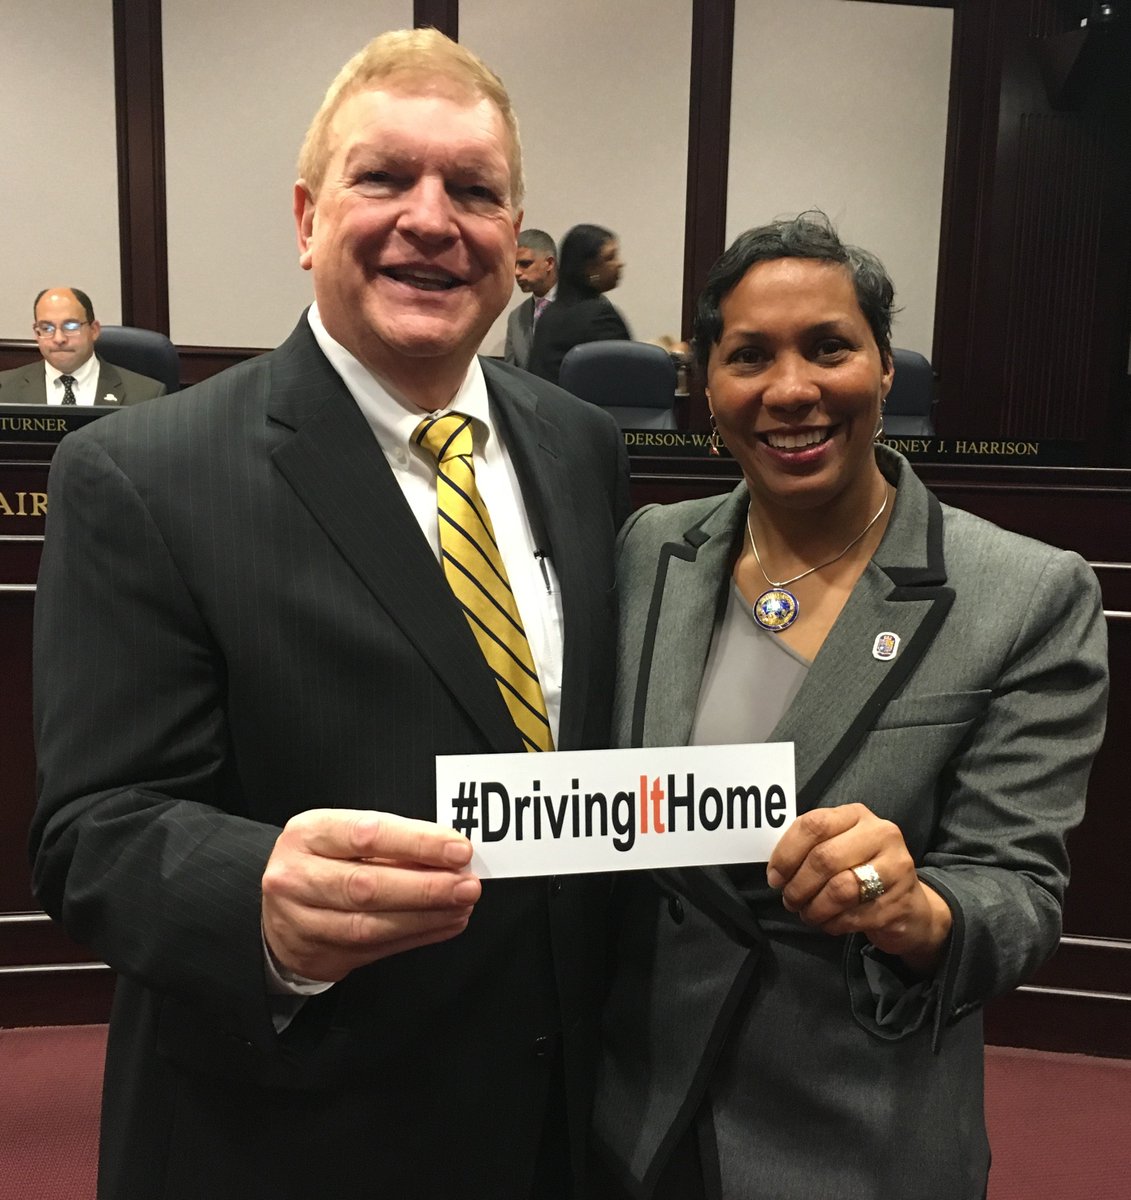 MDOT Secretary Pete K. Rahn and Prince George’s County Council member Monique Anderson-Walker promote the county’s safe driving initiative. #DrivingItHome #MDOTsafety #MDOTcares